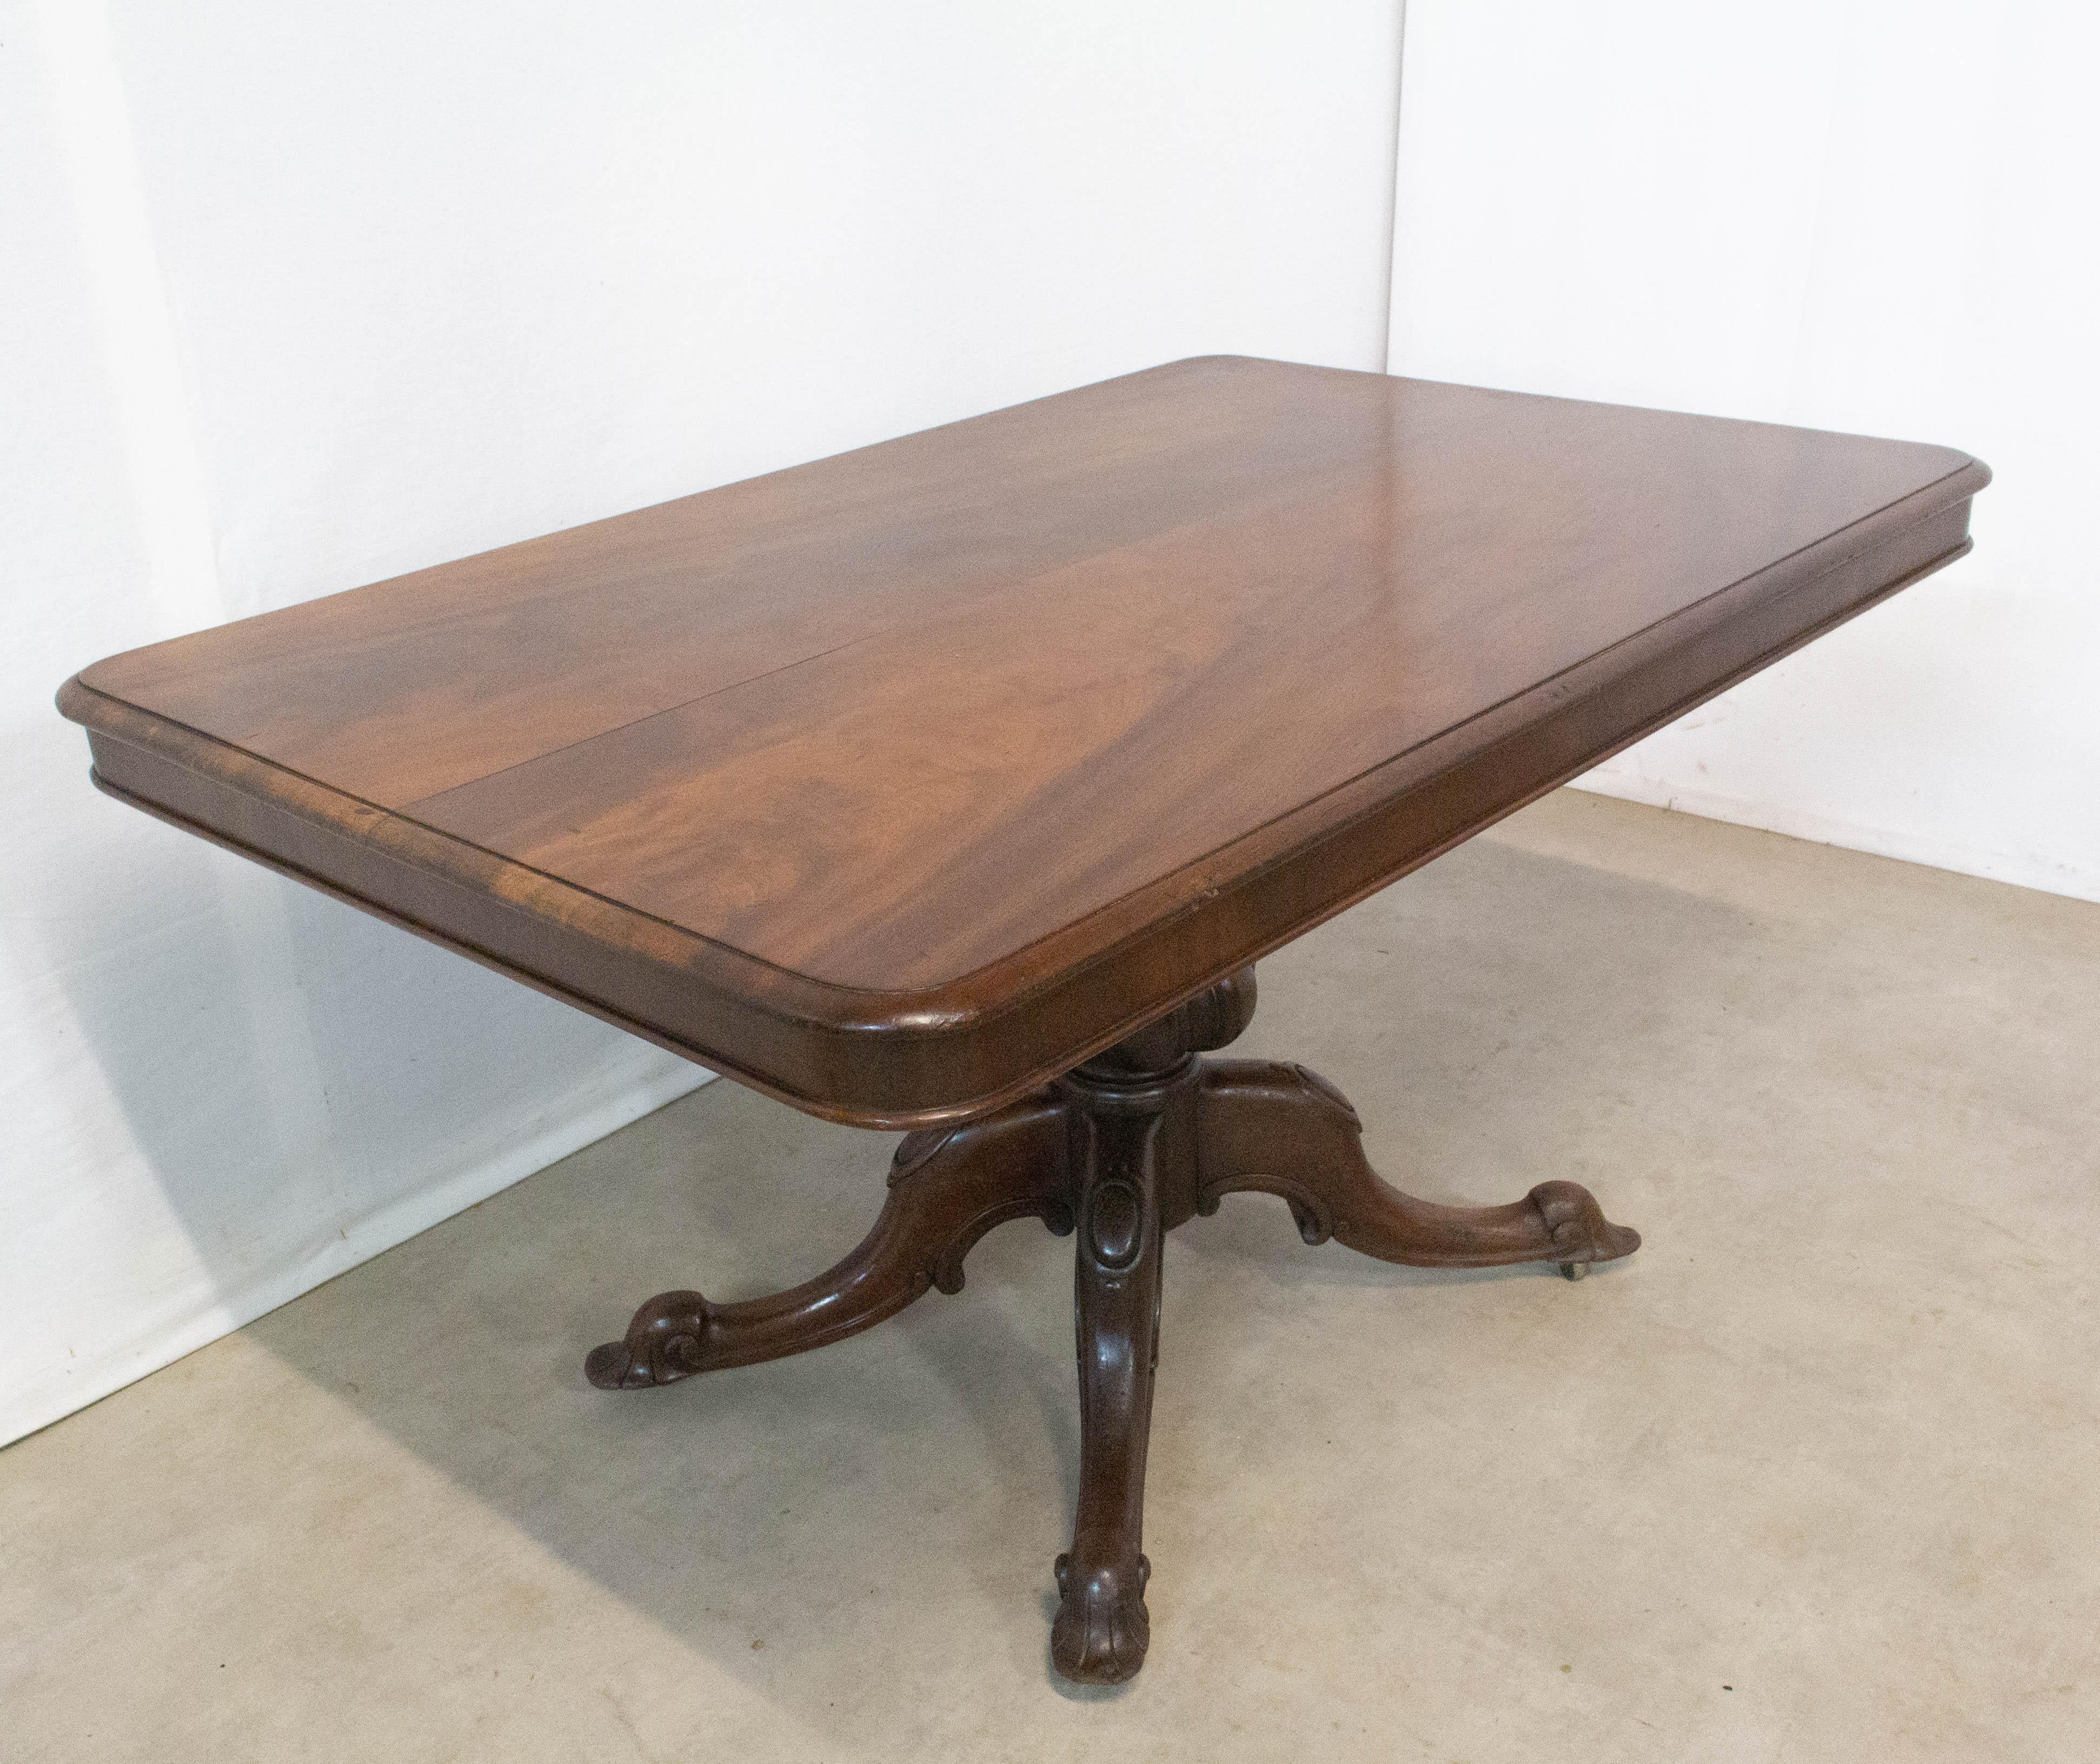 Tilt-top dining table, English 19th century.
Raised on four swept legs.
Hand carved exotic wood.
The table legs are mounted on casters.
Good antique condition with very good patina minor signs of use for its age.
Dimensions when the table top is